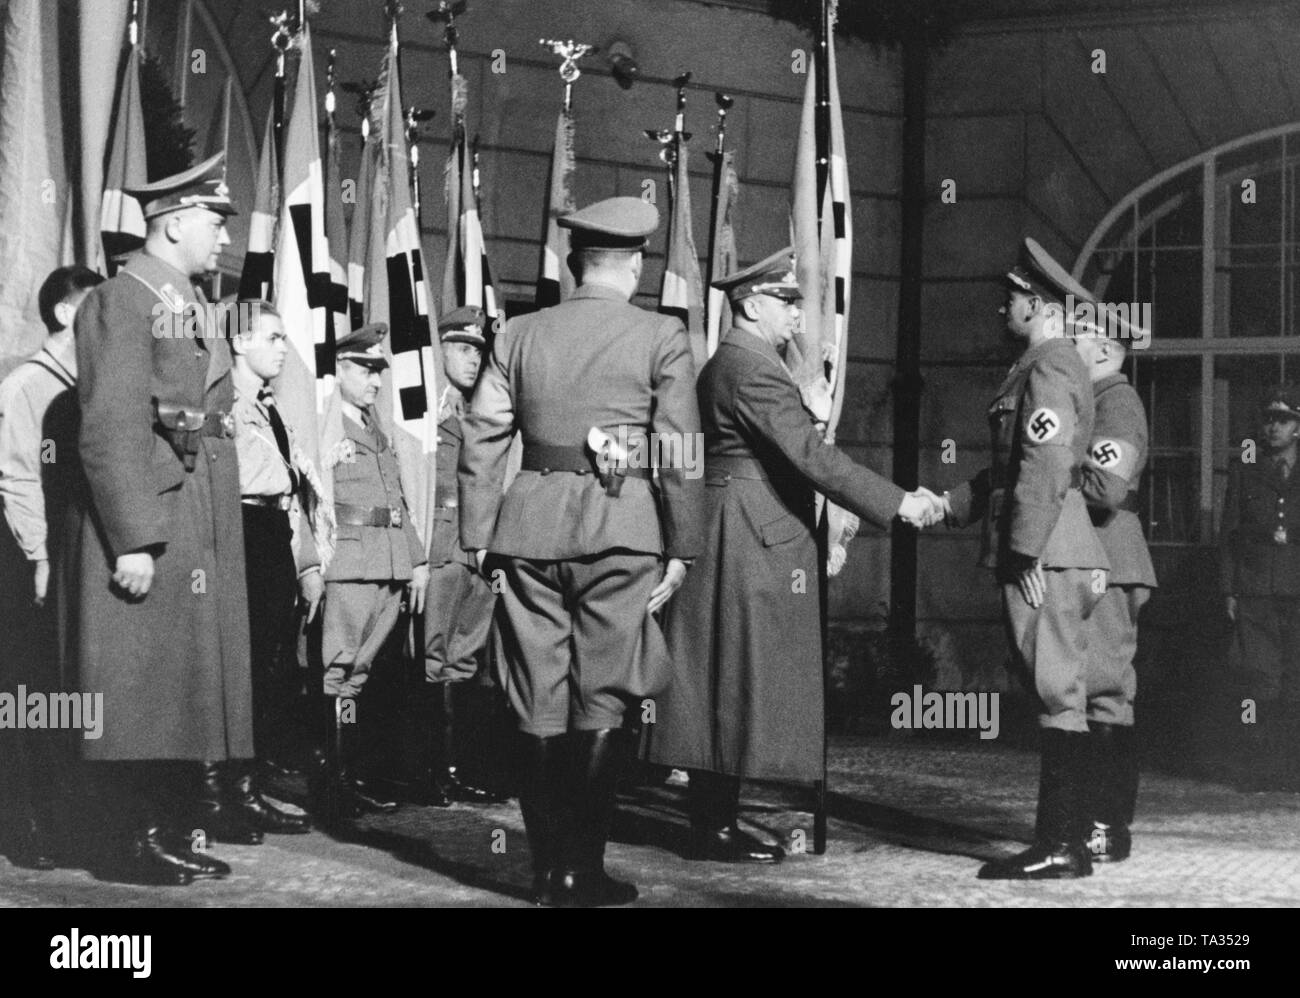 On the occasion of Robert Ley's visit in Prague, the Gauleiter of the Sudetenland Konrad Henlein hands over flags to 32 local groups. Since March 1939, the areas of Bohemia and Moravia had been under German occupation. Stock Photo